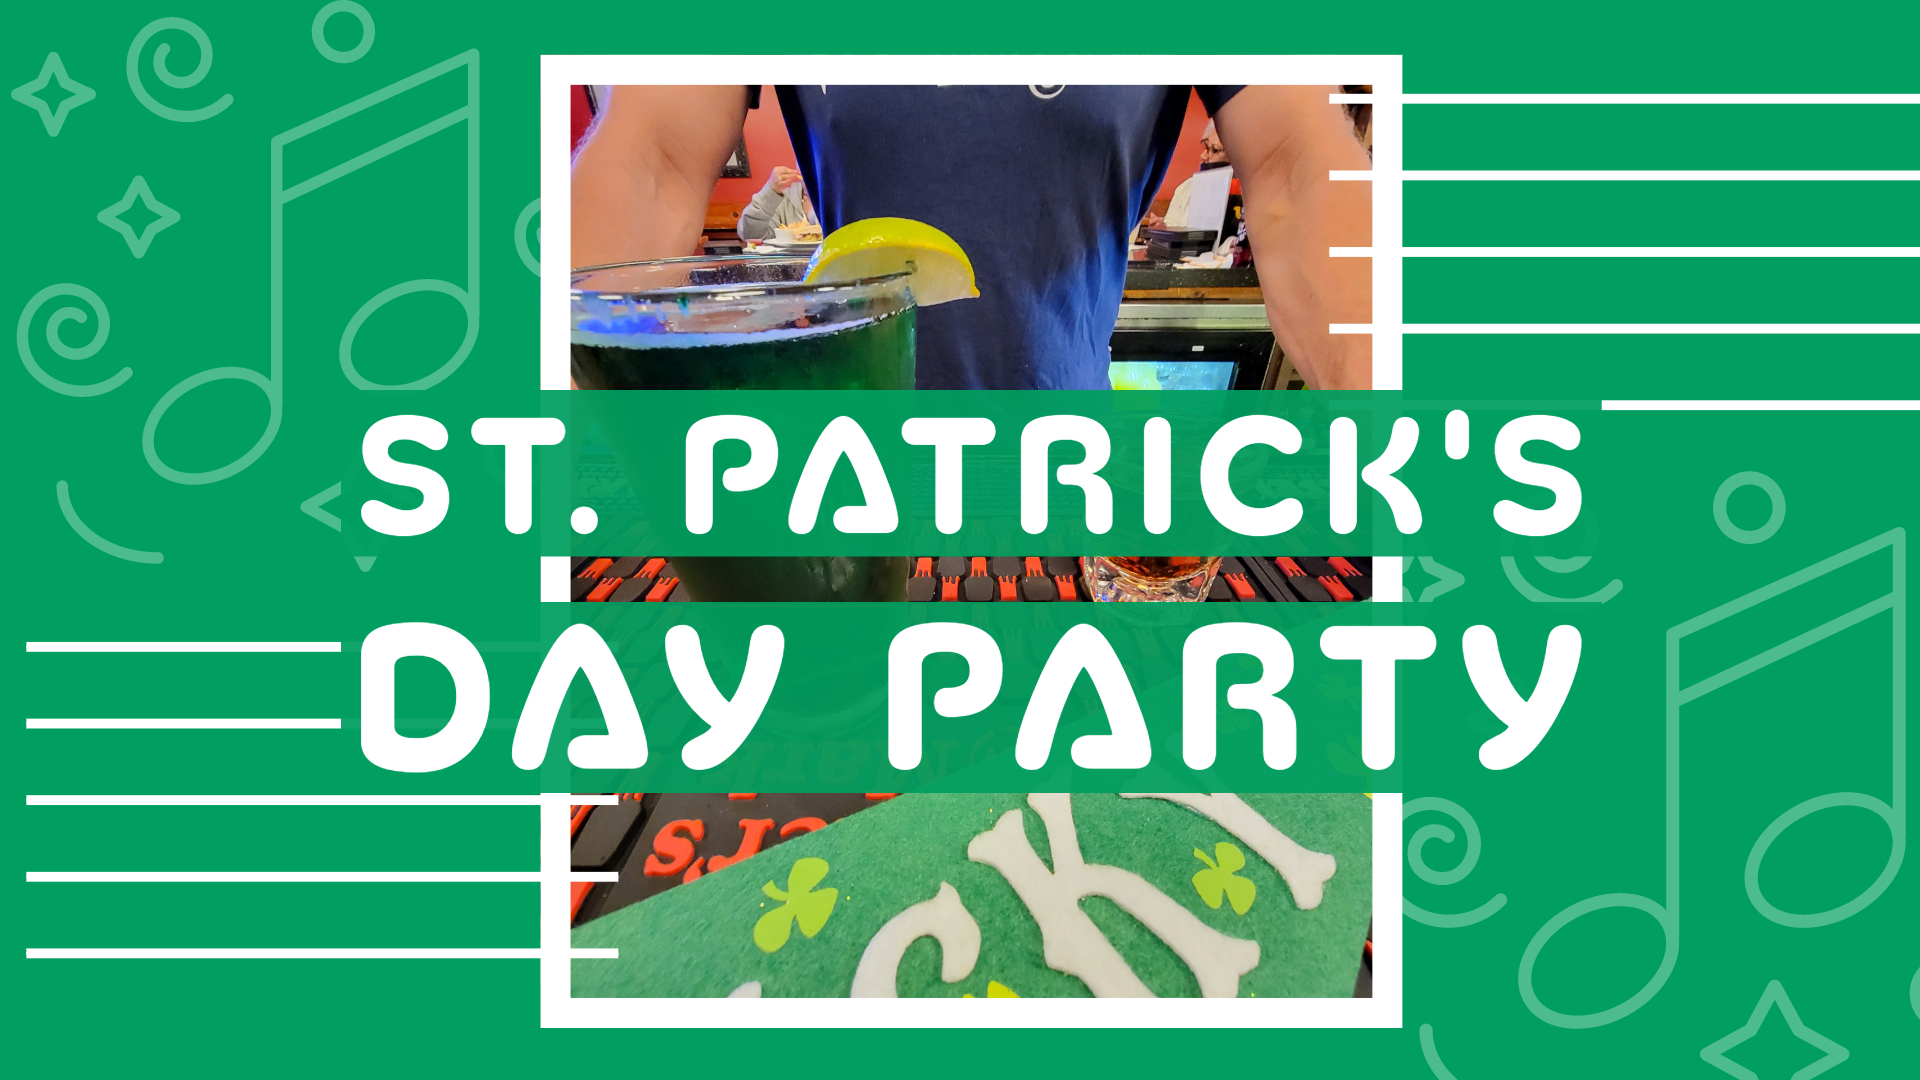 St. Patrick's Day Party with Special Food Menu Promo Image